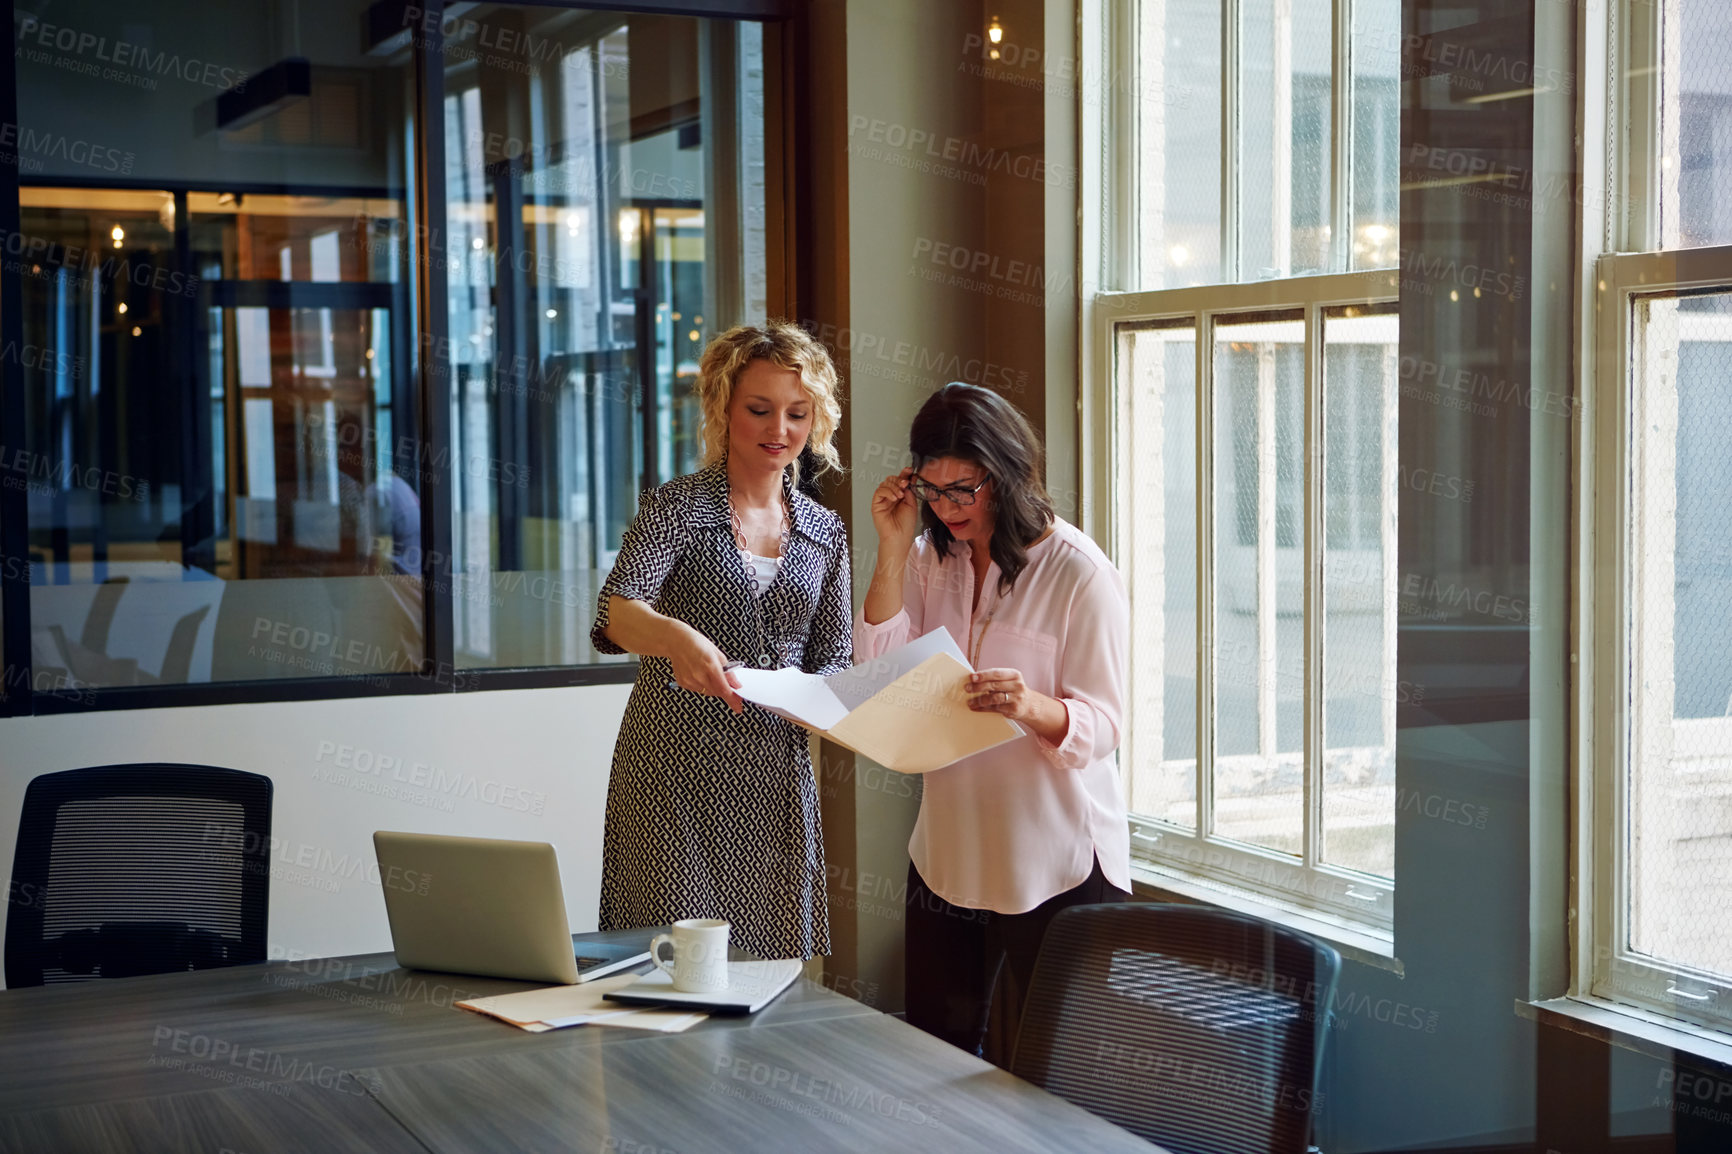 Buy stock photo Shot of two businesswomen talking together over paperwork in an office